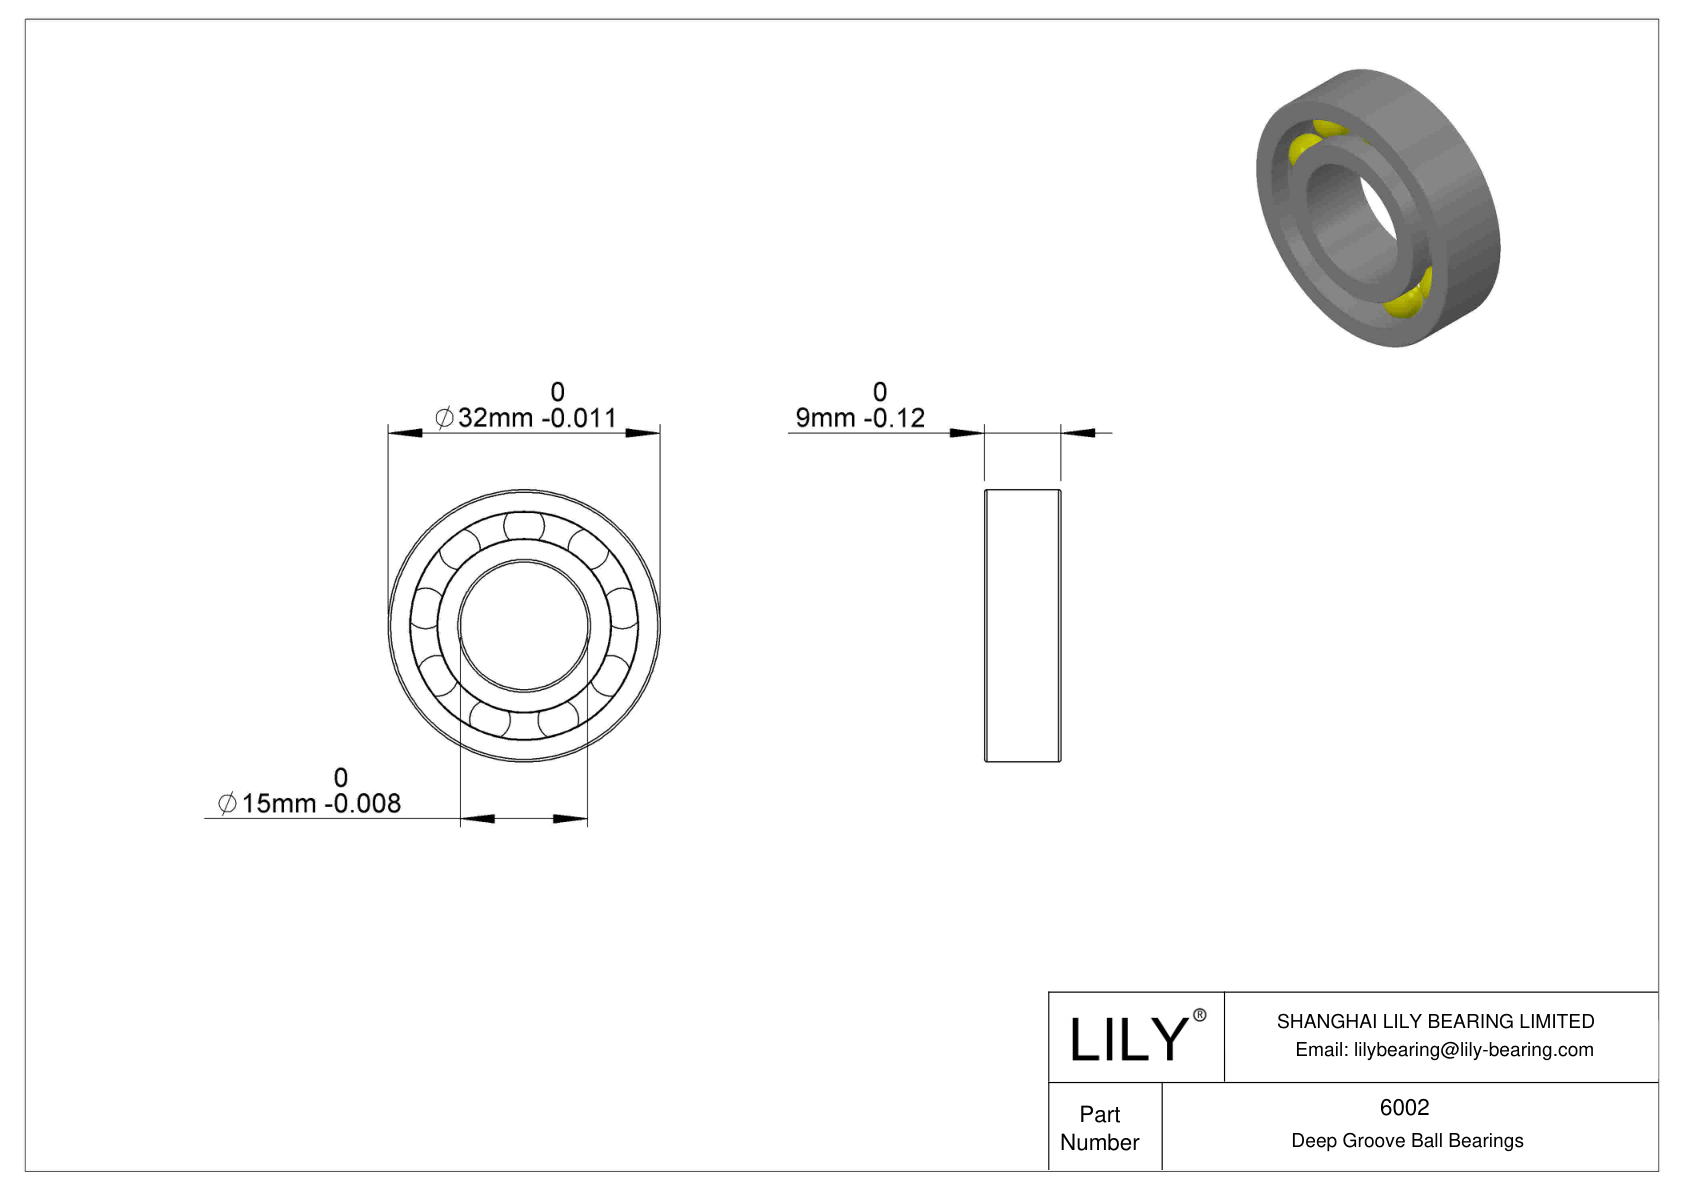 LILY-BS600240-12 POM Coated Bearing cad drawing